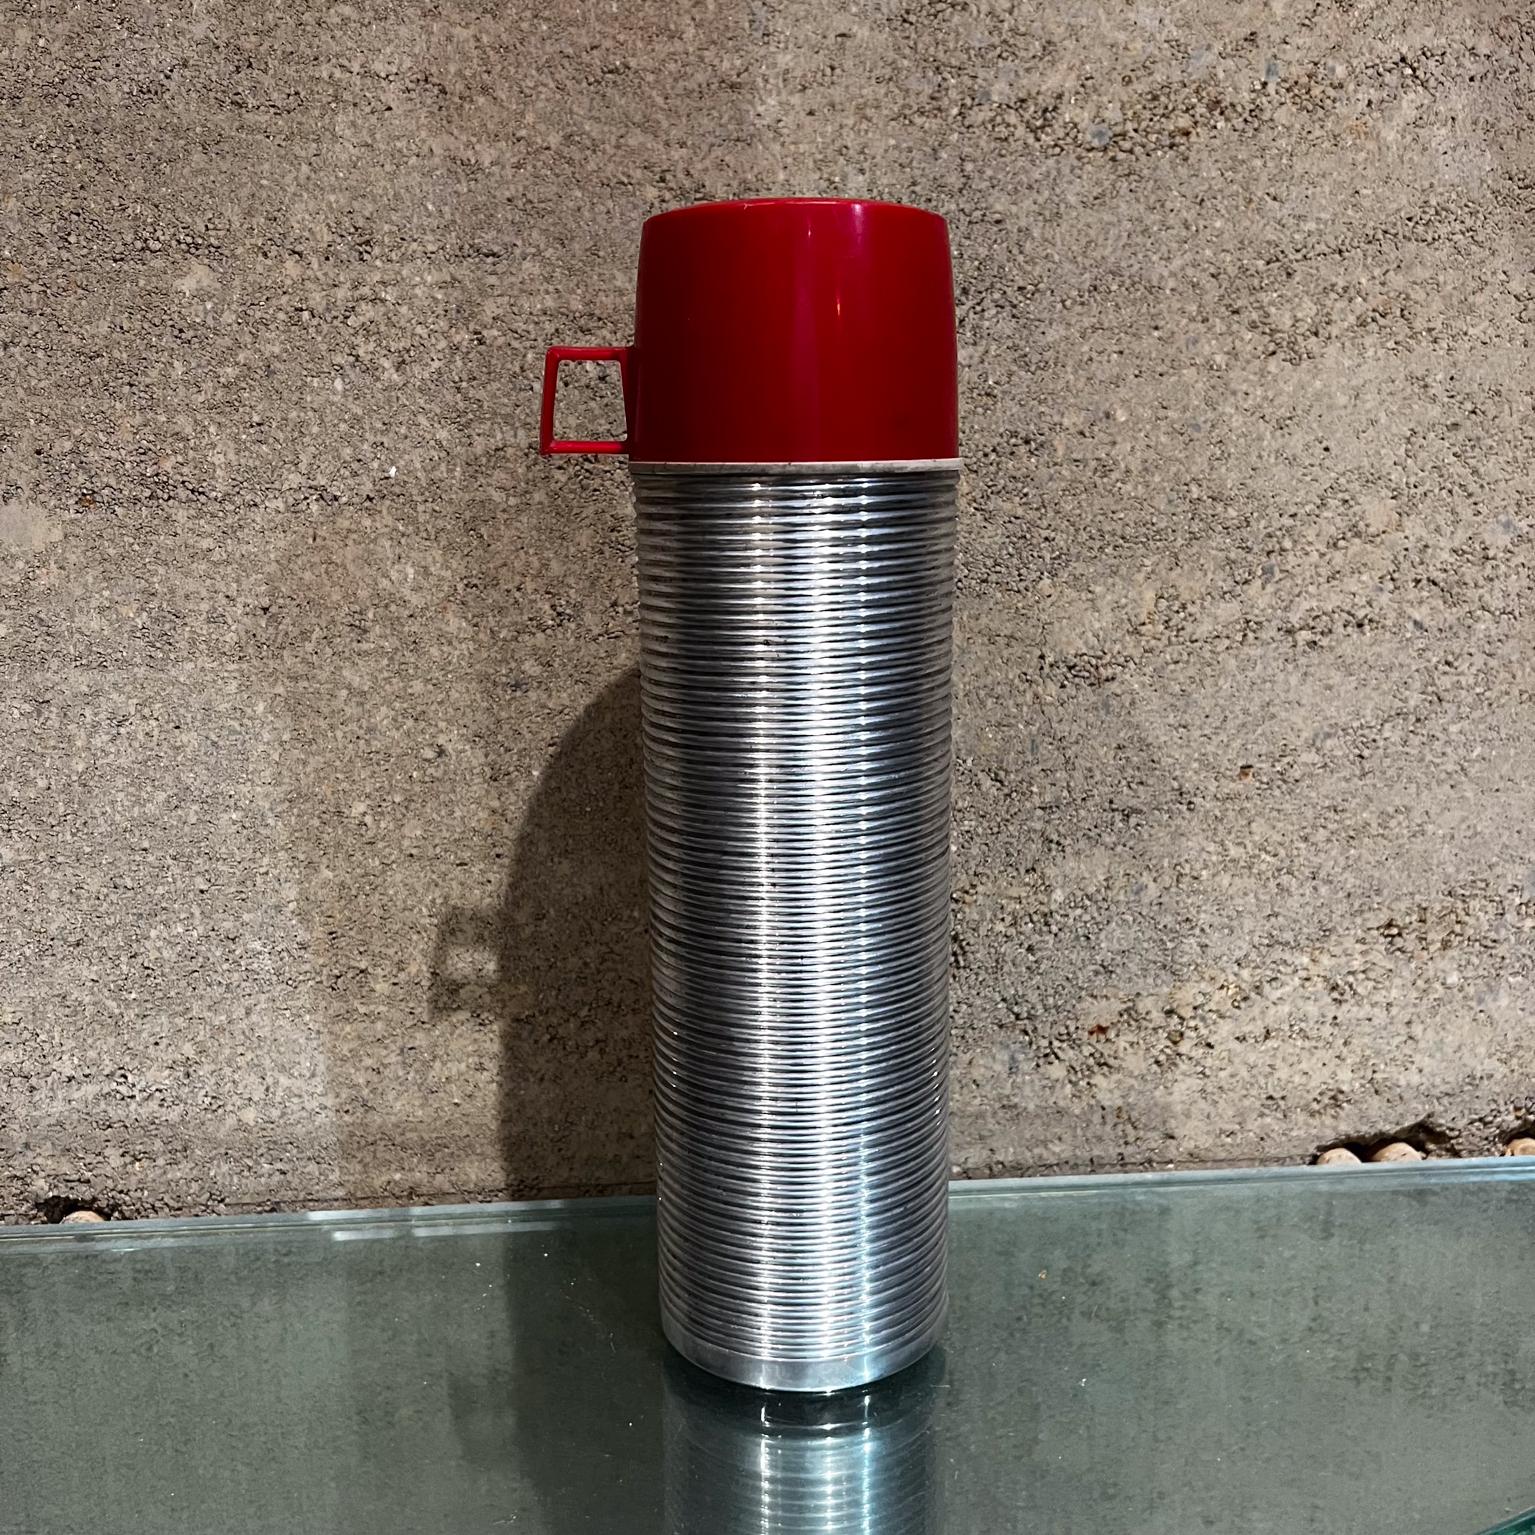 1970s Vintage Ribbed Thermos Retro Camp Gear USA
Quart size thermos with red cup. 
Insulated.
13.25 tall x 3.75 diameter Cup 2.5 tall x 3.75 diameter x 4.75 d
Original vintage condition. See all images.
